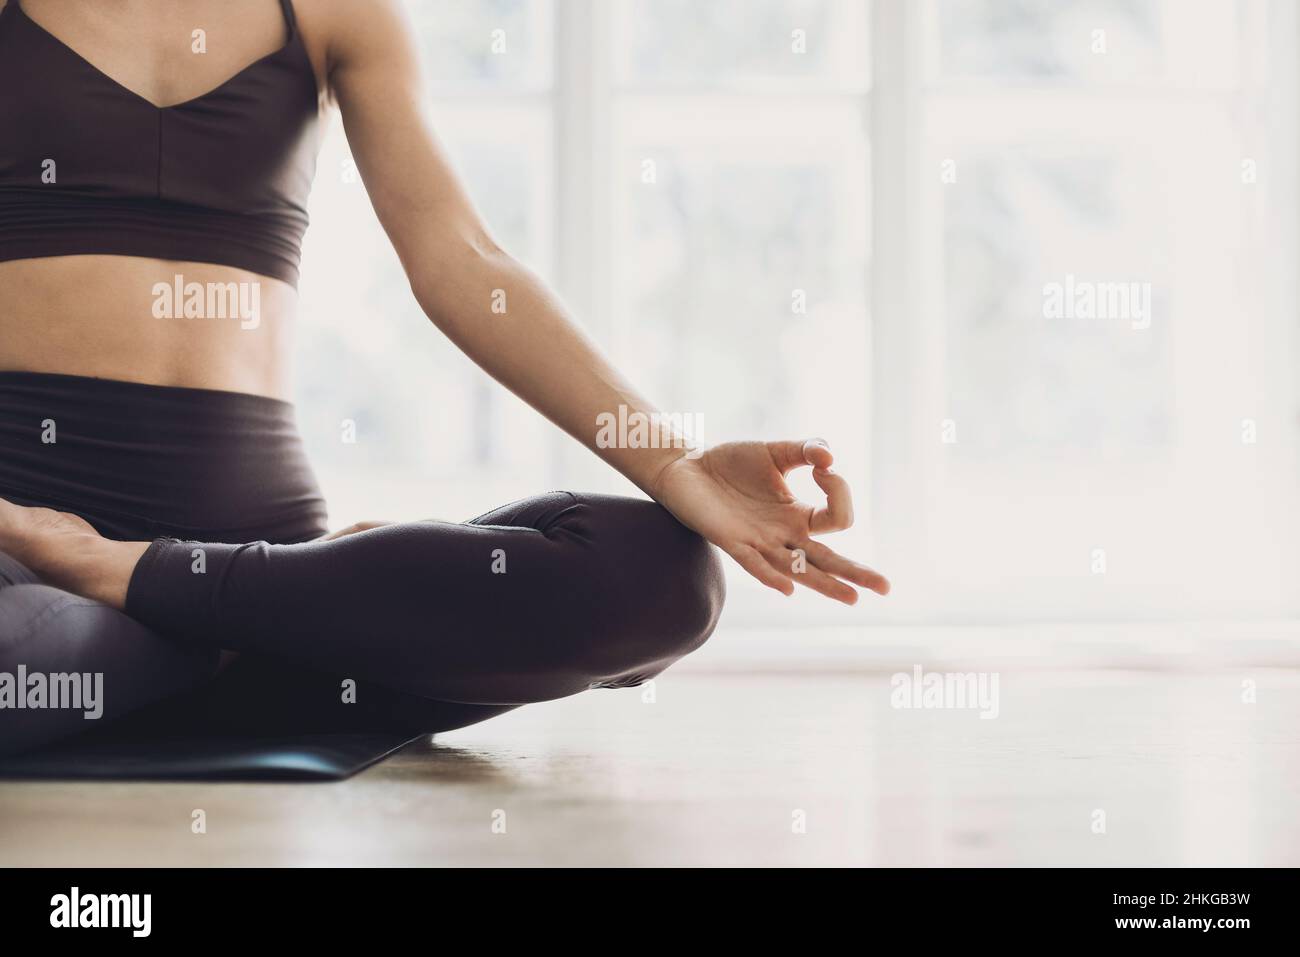 Girl doing fitness exercise, practicing yoga in class, young woman meditating.Training, fitness, workout, relaxation, healthy lifestyle concept Stock Photo